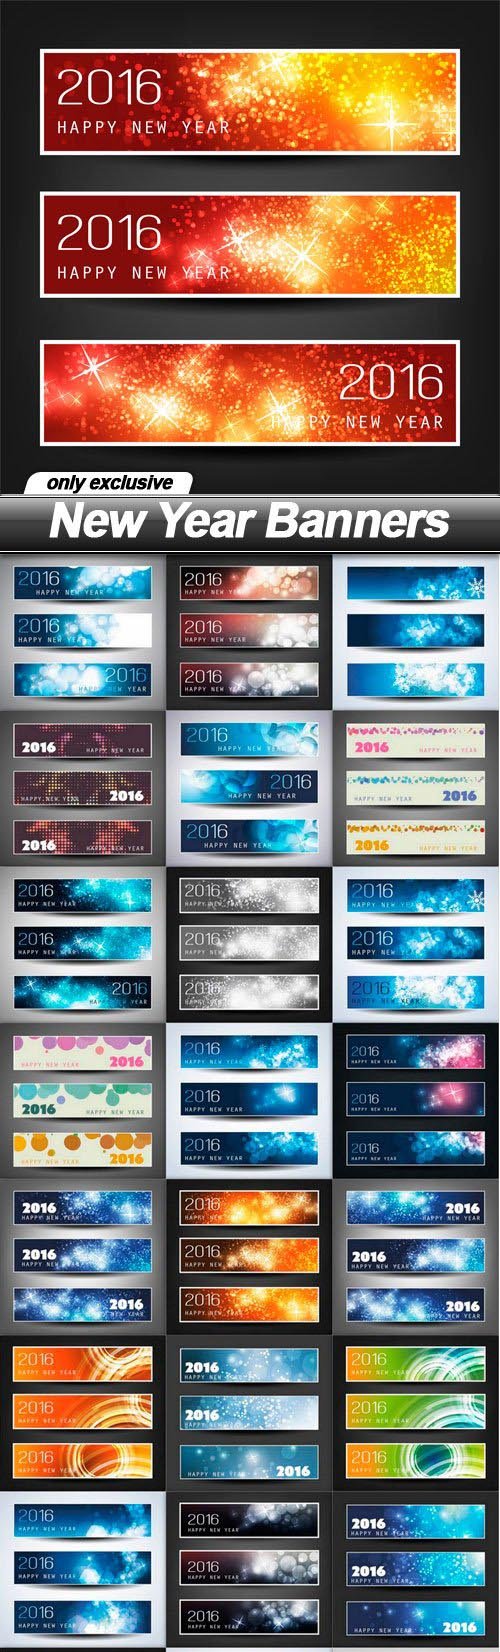 New Year Banners - 25 EPS